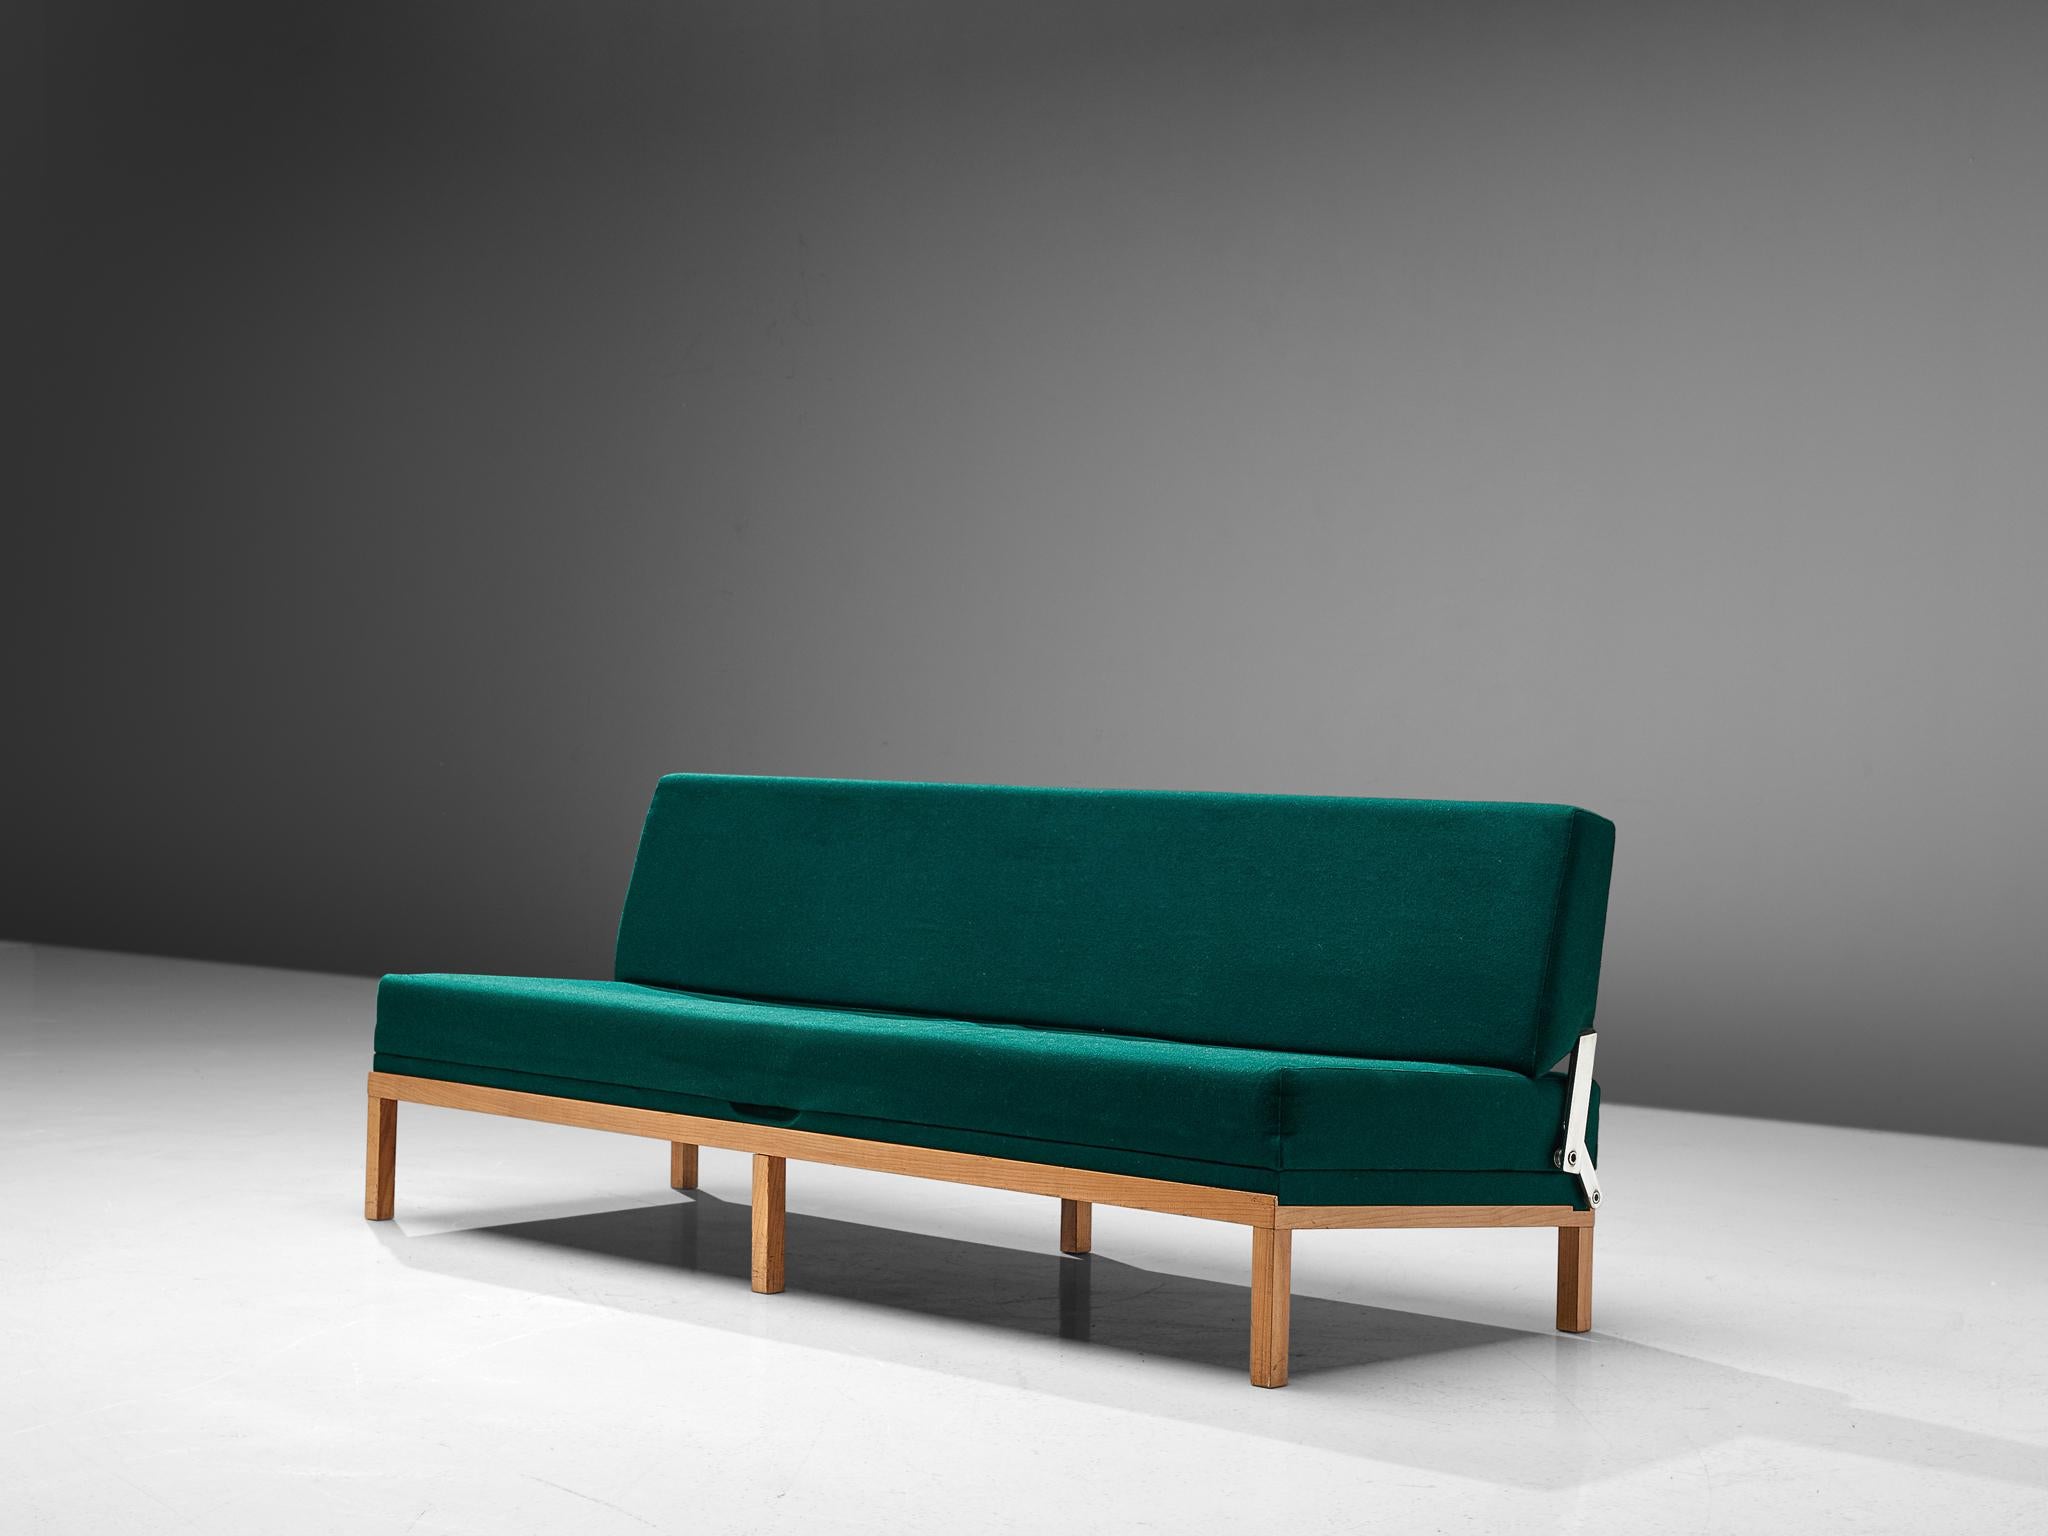 Johannes Spalt for Wittmann, green fabric, teak, Austria, 1960s.

This Austrian daybed is named 'Constanze'. This early model, with teak frame and green upholstery is wonderfully balanced in its color palette. The elegant slim legs create an open